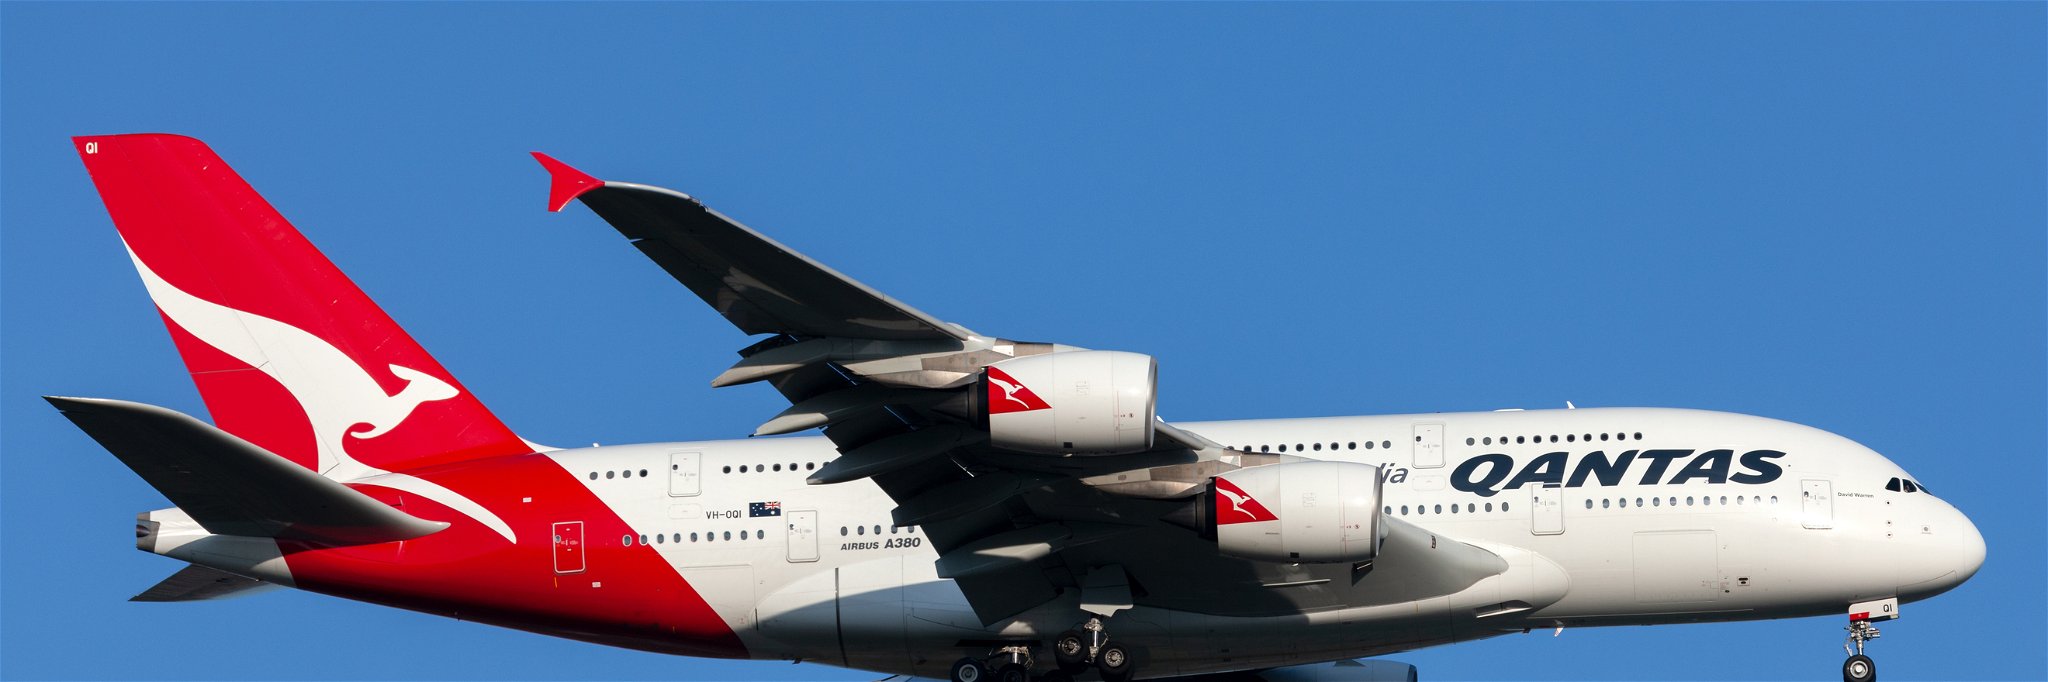 All Qantas workers will need to be fully vaccinated against Covid-19